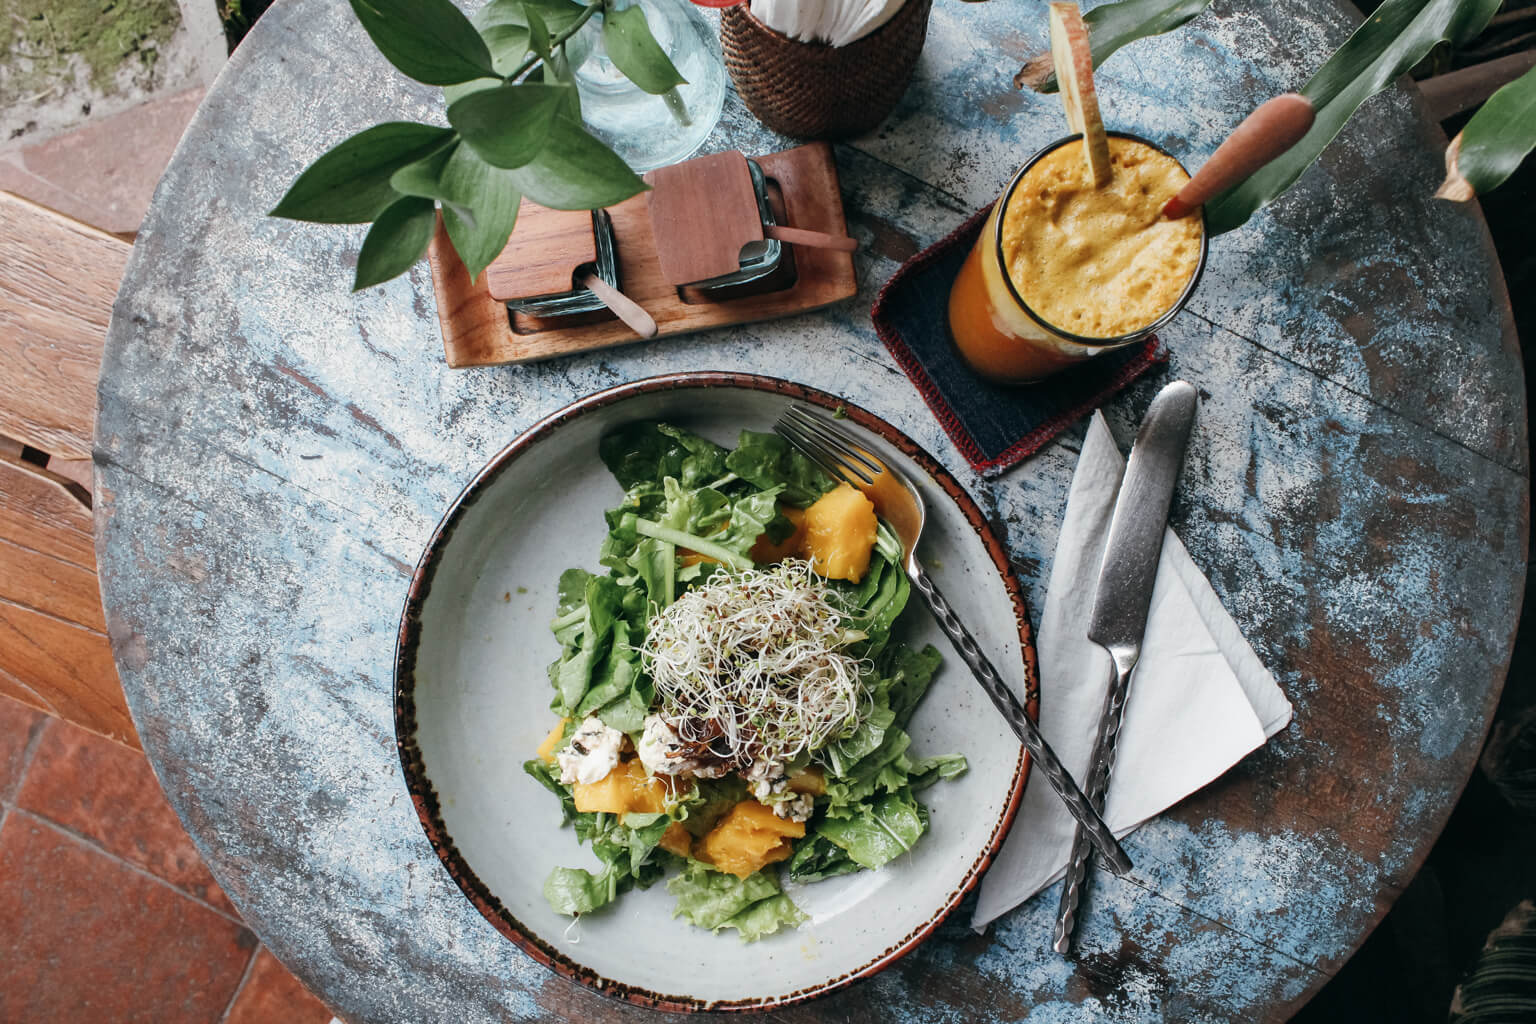 Bali City Guide: A healthy, real food, gluten-free travel guide to Bali (including Ubud, Seminyak, Canggu, the Bukit and more). 